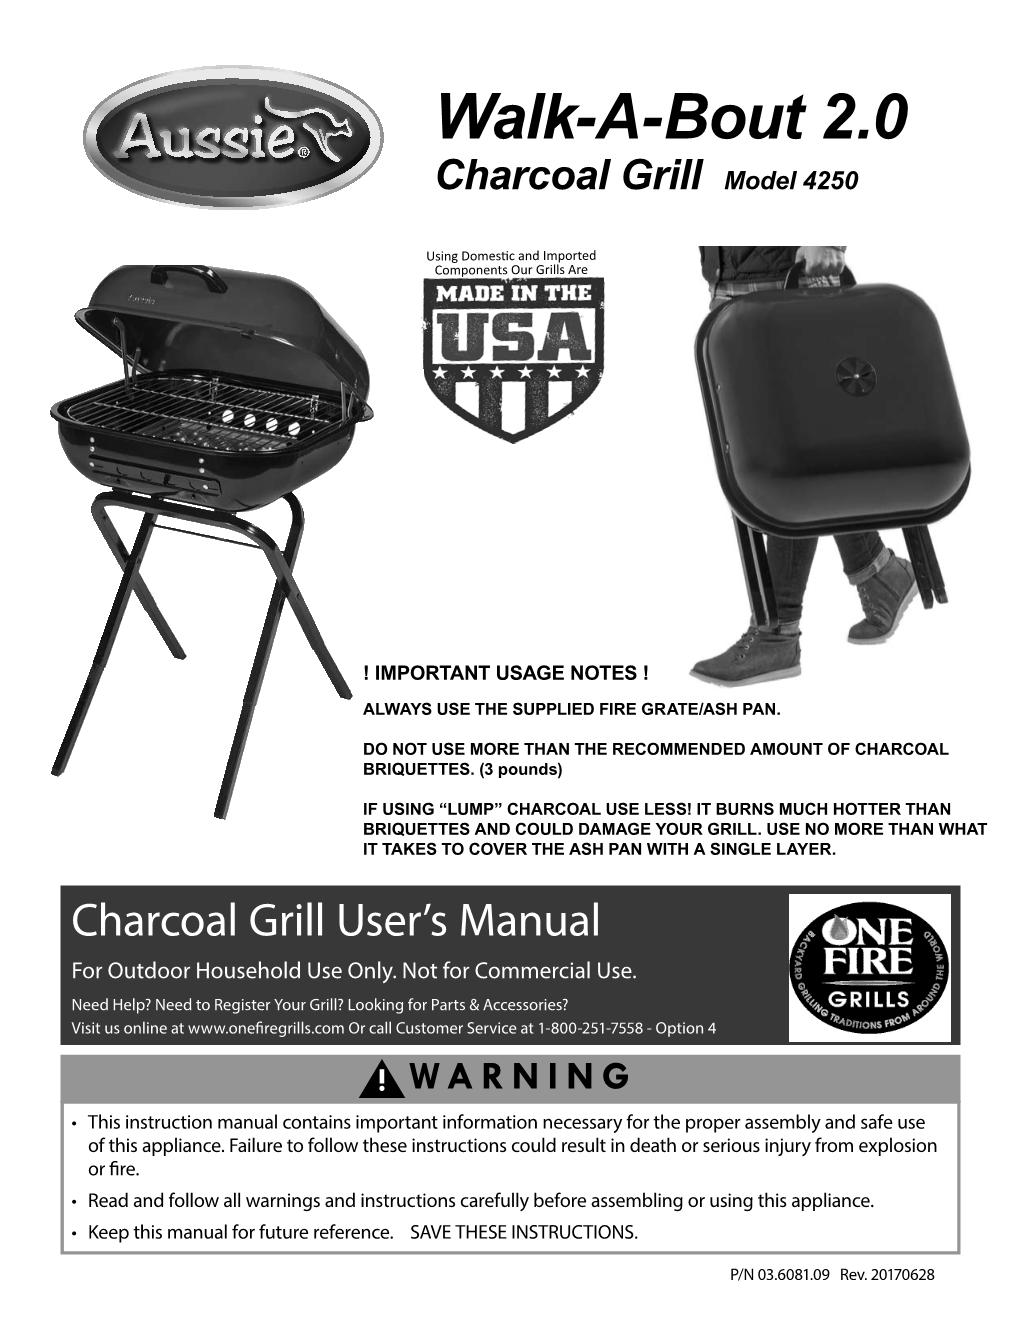 Walk-A-Bout 2.0 Charcoal Grill Model 4250